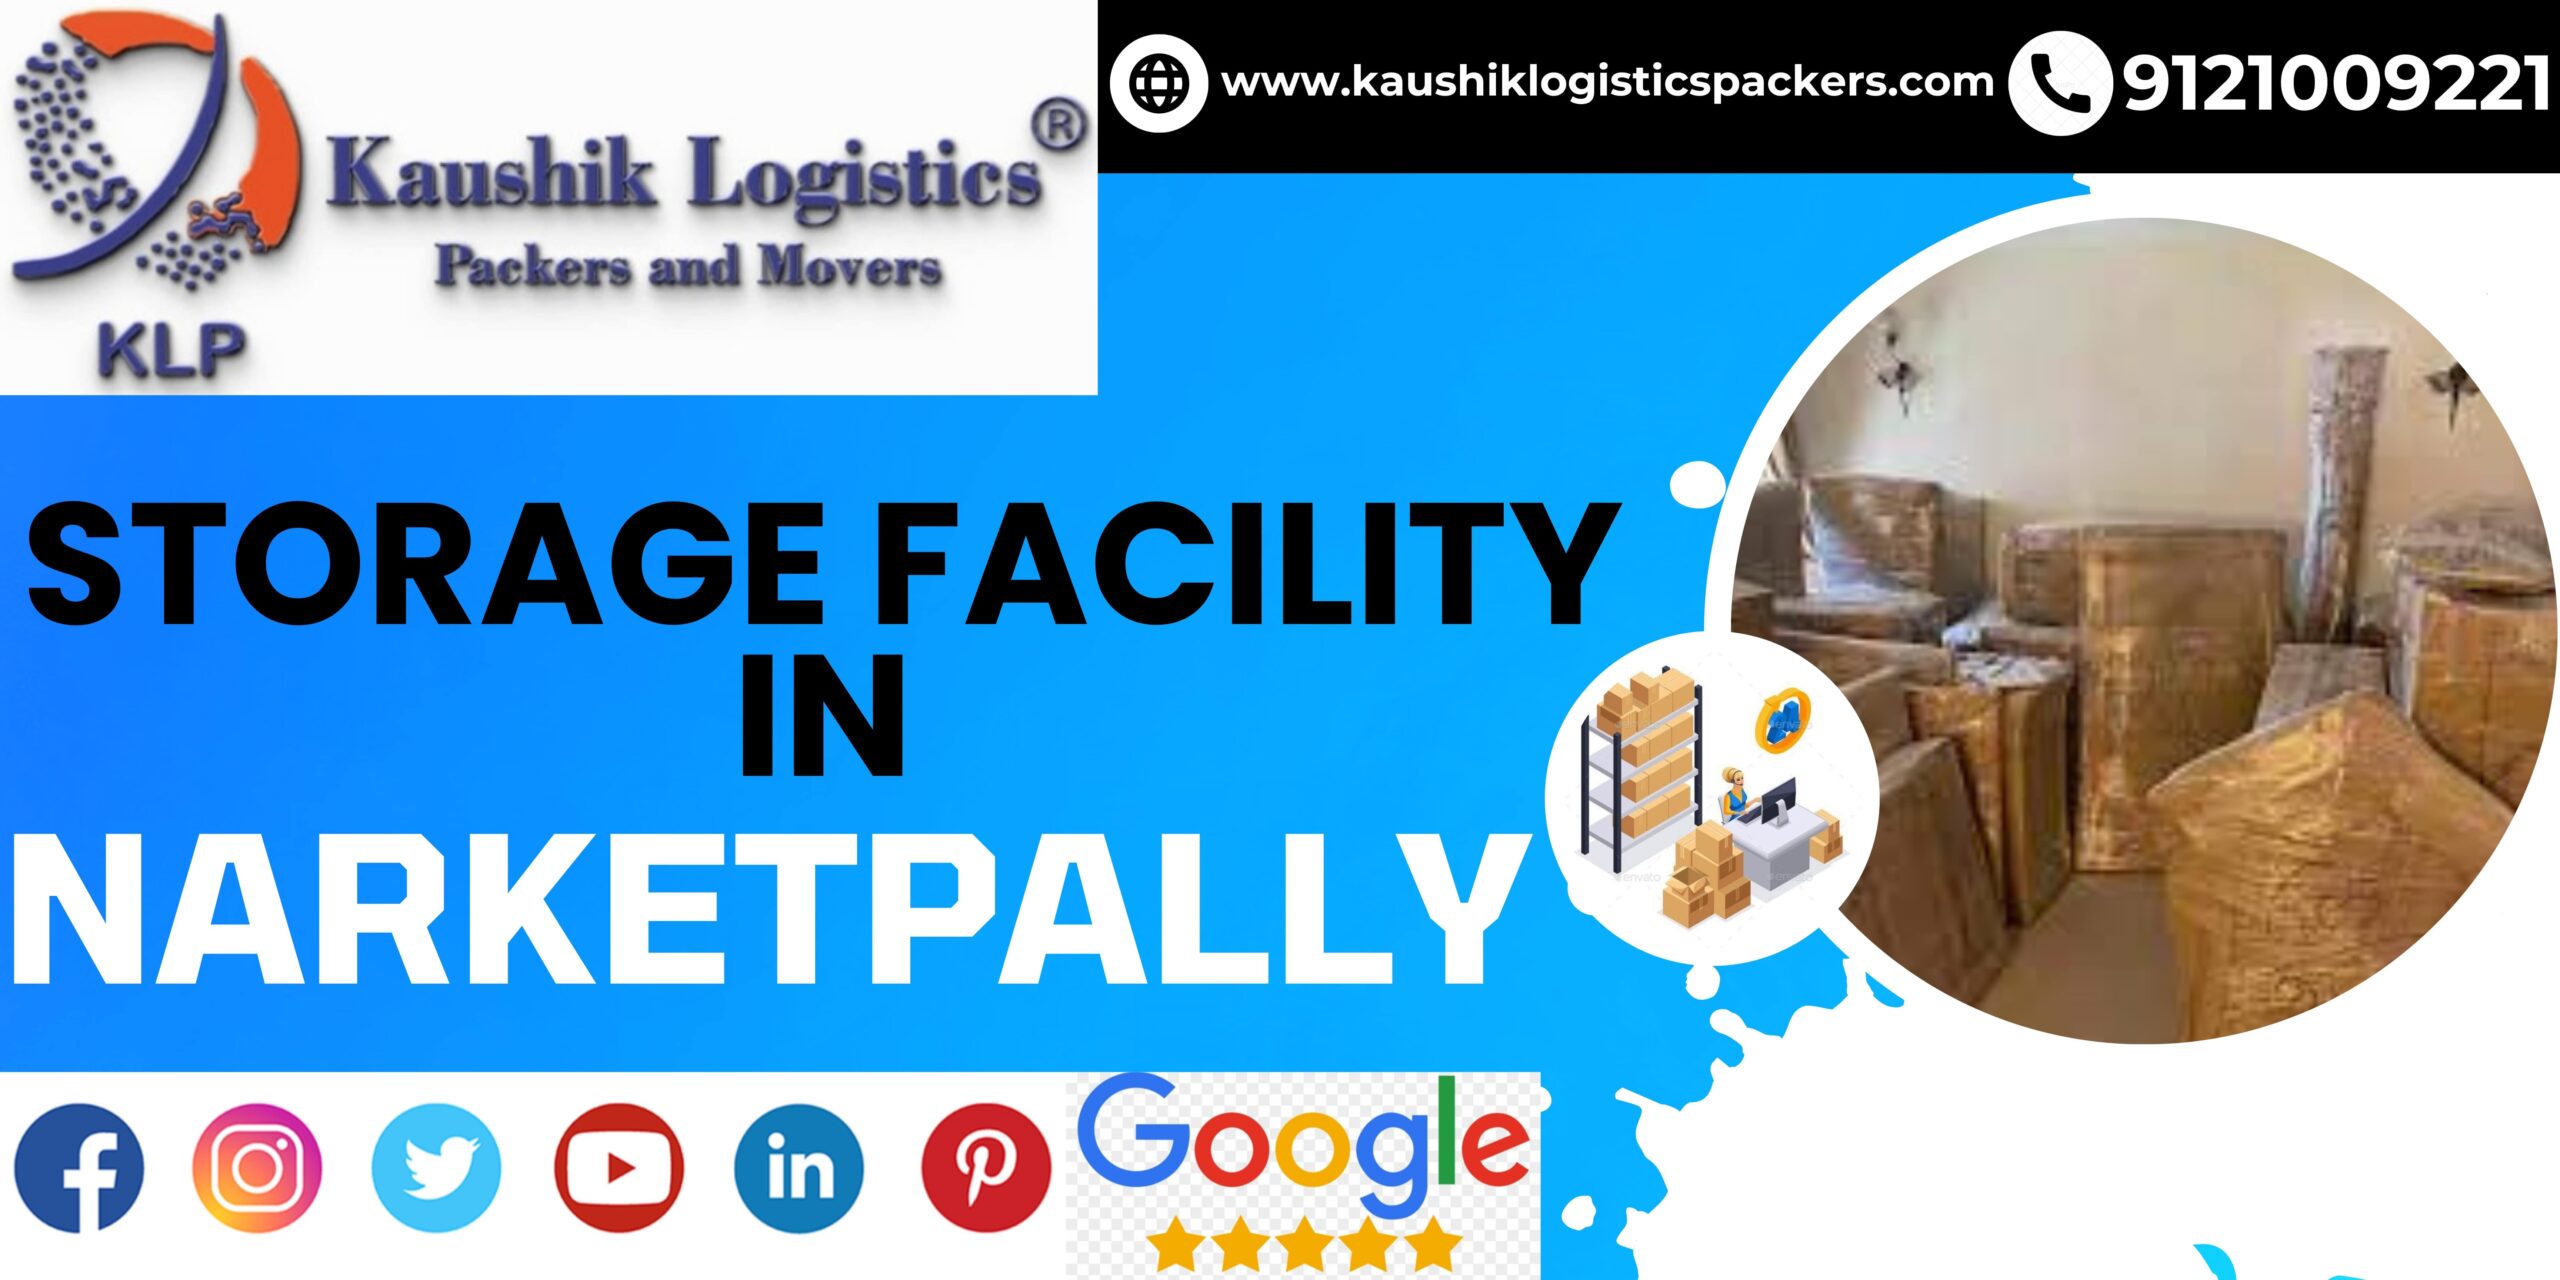 Packers and Movers In Narketpally